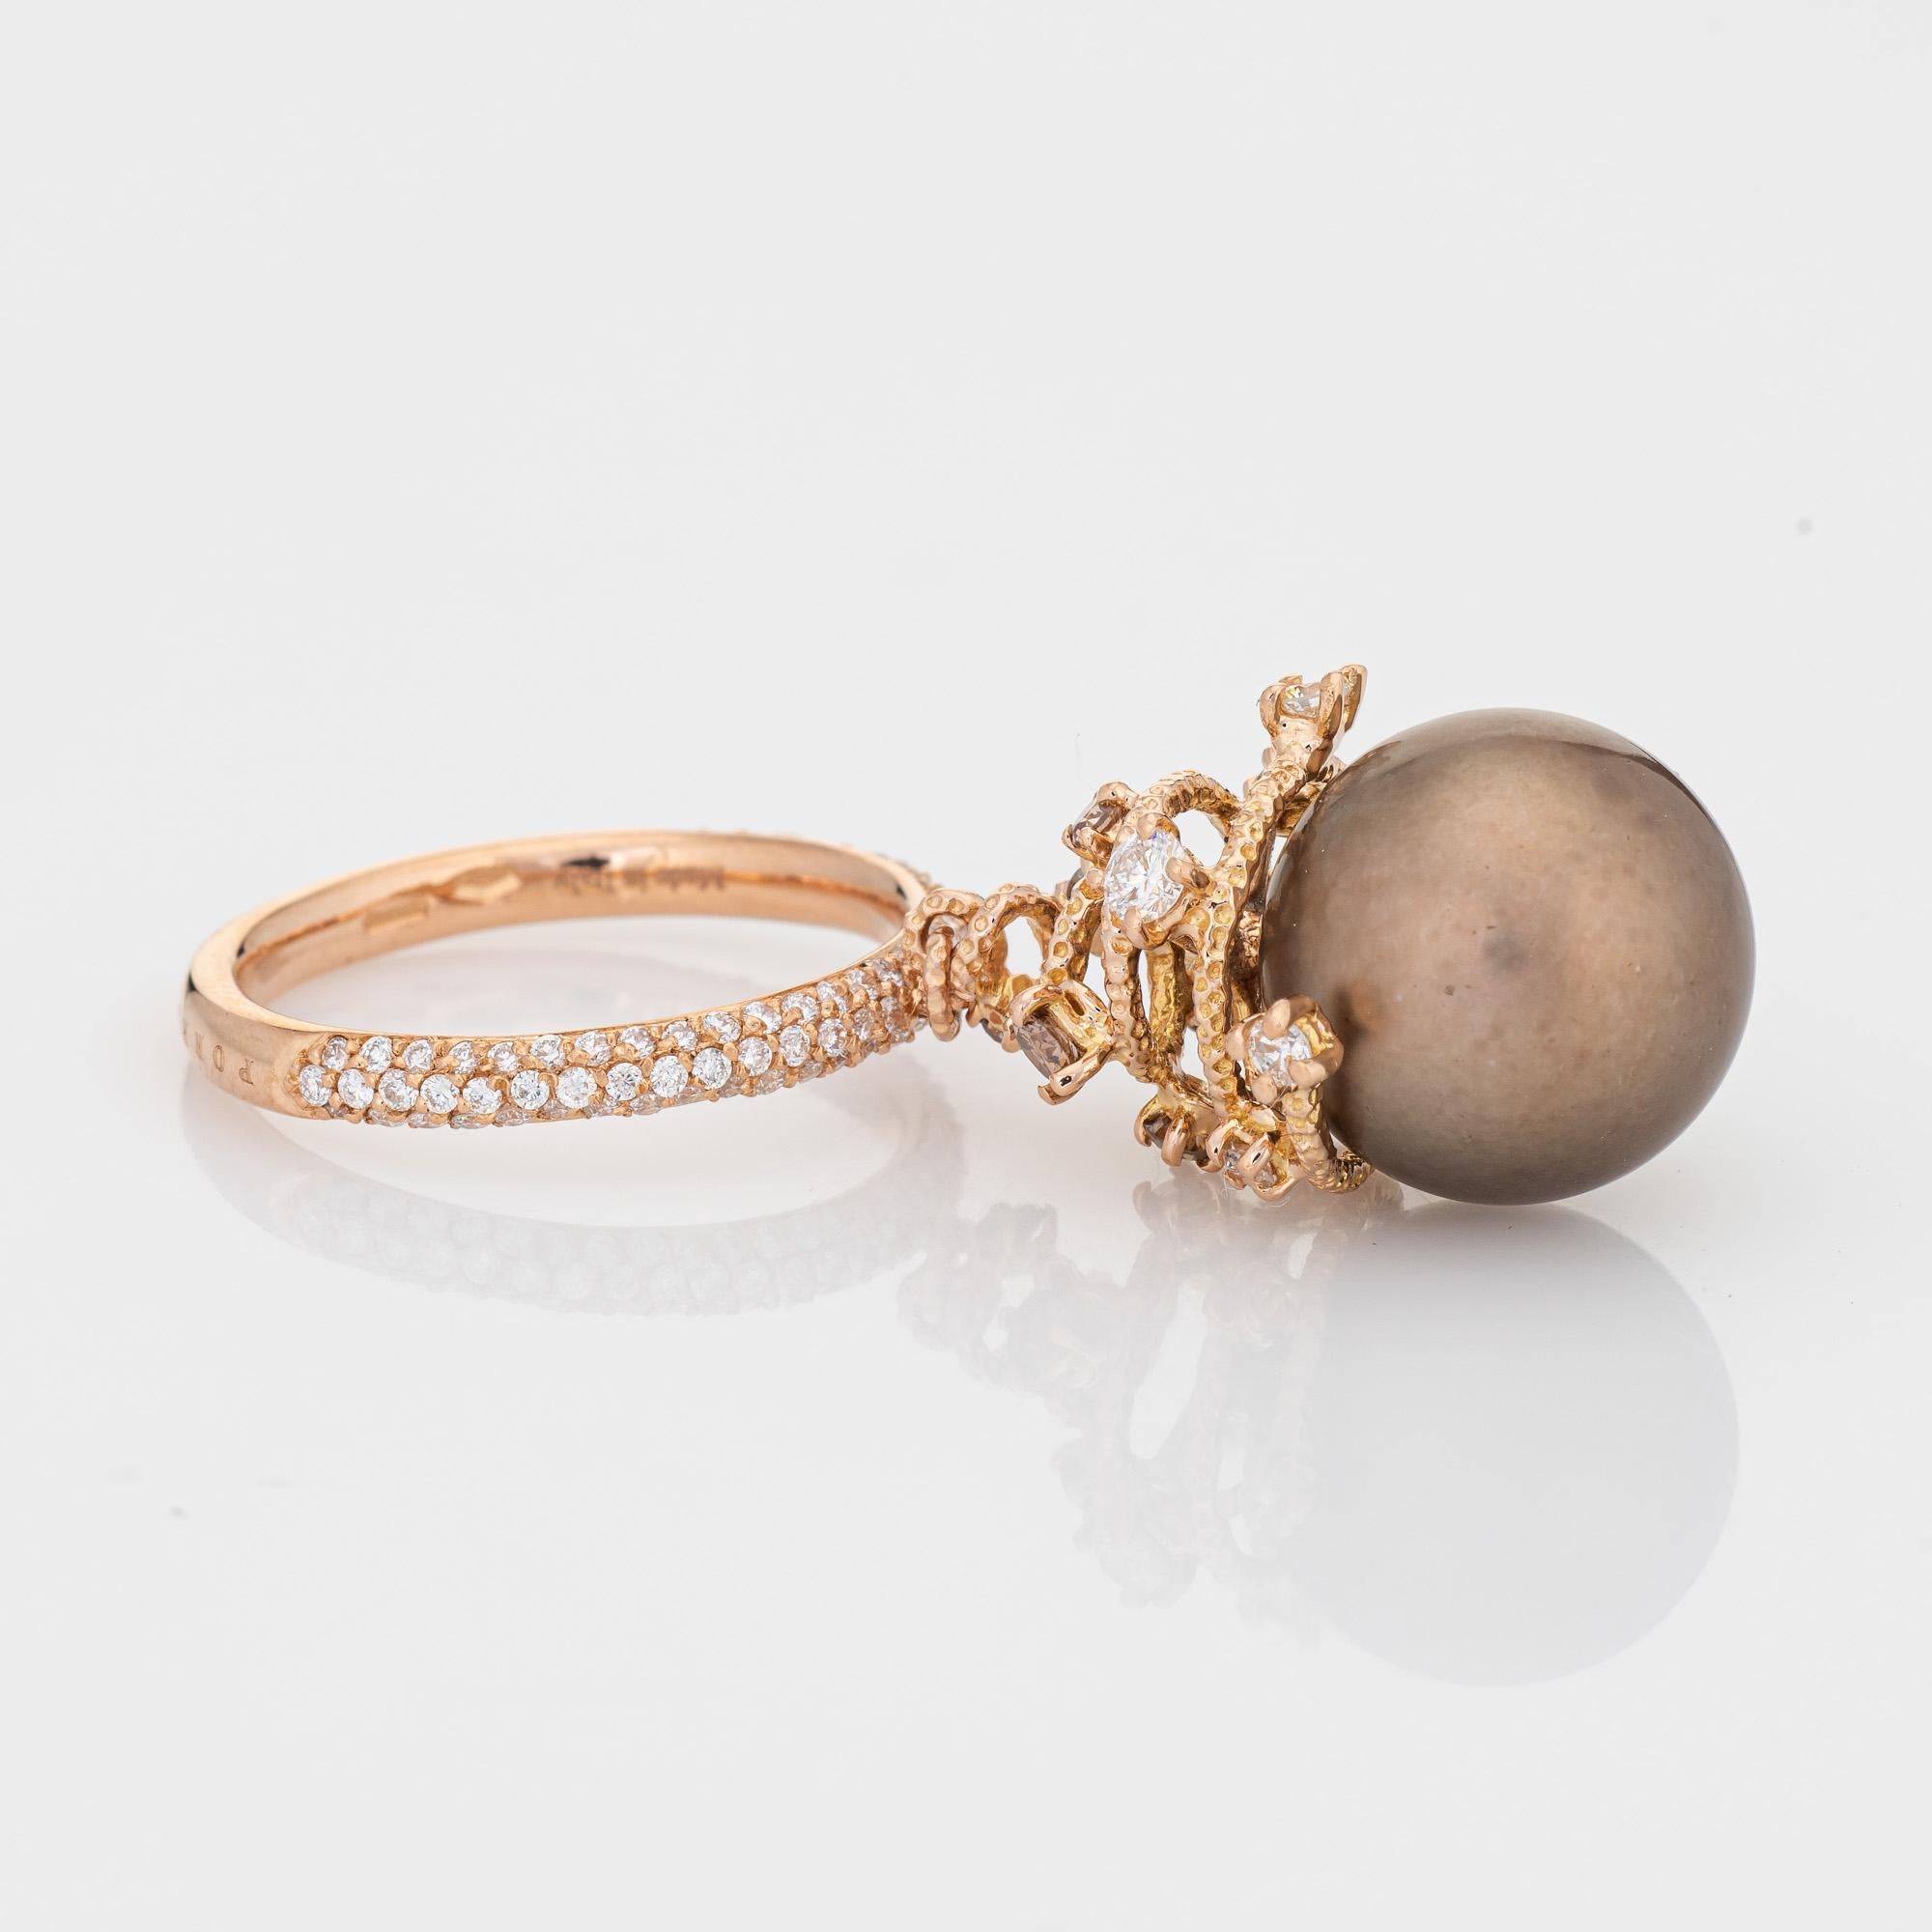 Stylish Roberta Porrati charm ring crafted in 18 karat yellow gold.

Chocolate South Sea Pearl measures 13mm. Diamonds total an estimated 0.82 carats (estimated at H-I & C2-3 color and SI1-I1 clarity). 

Designed as a charm ring to move with you,